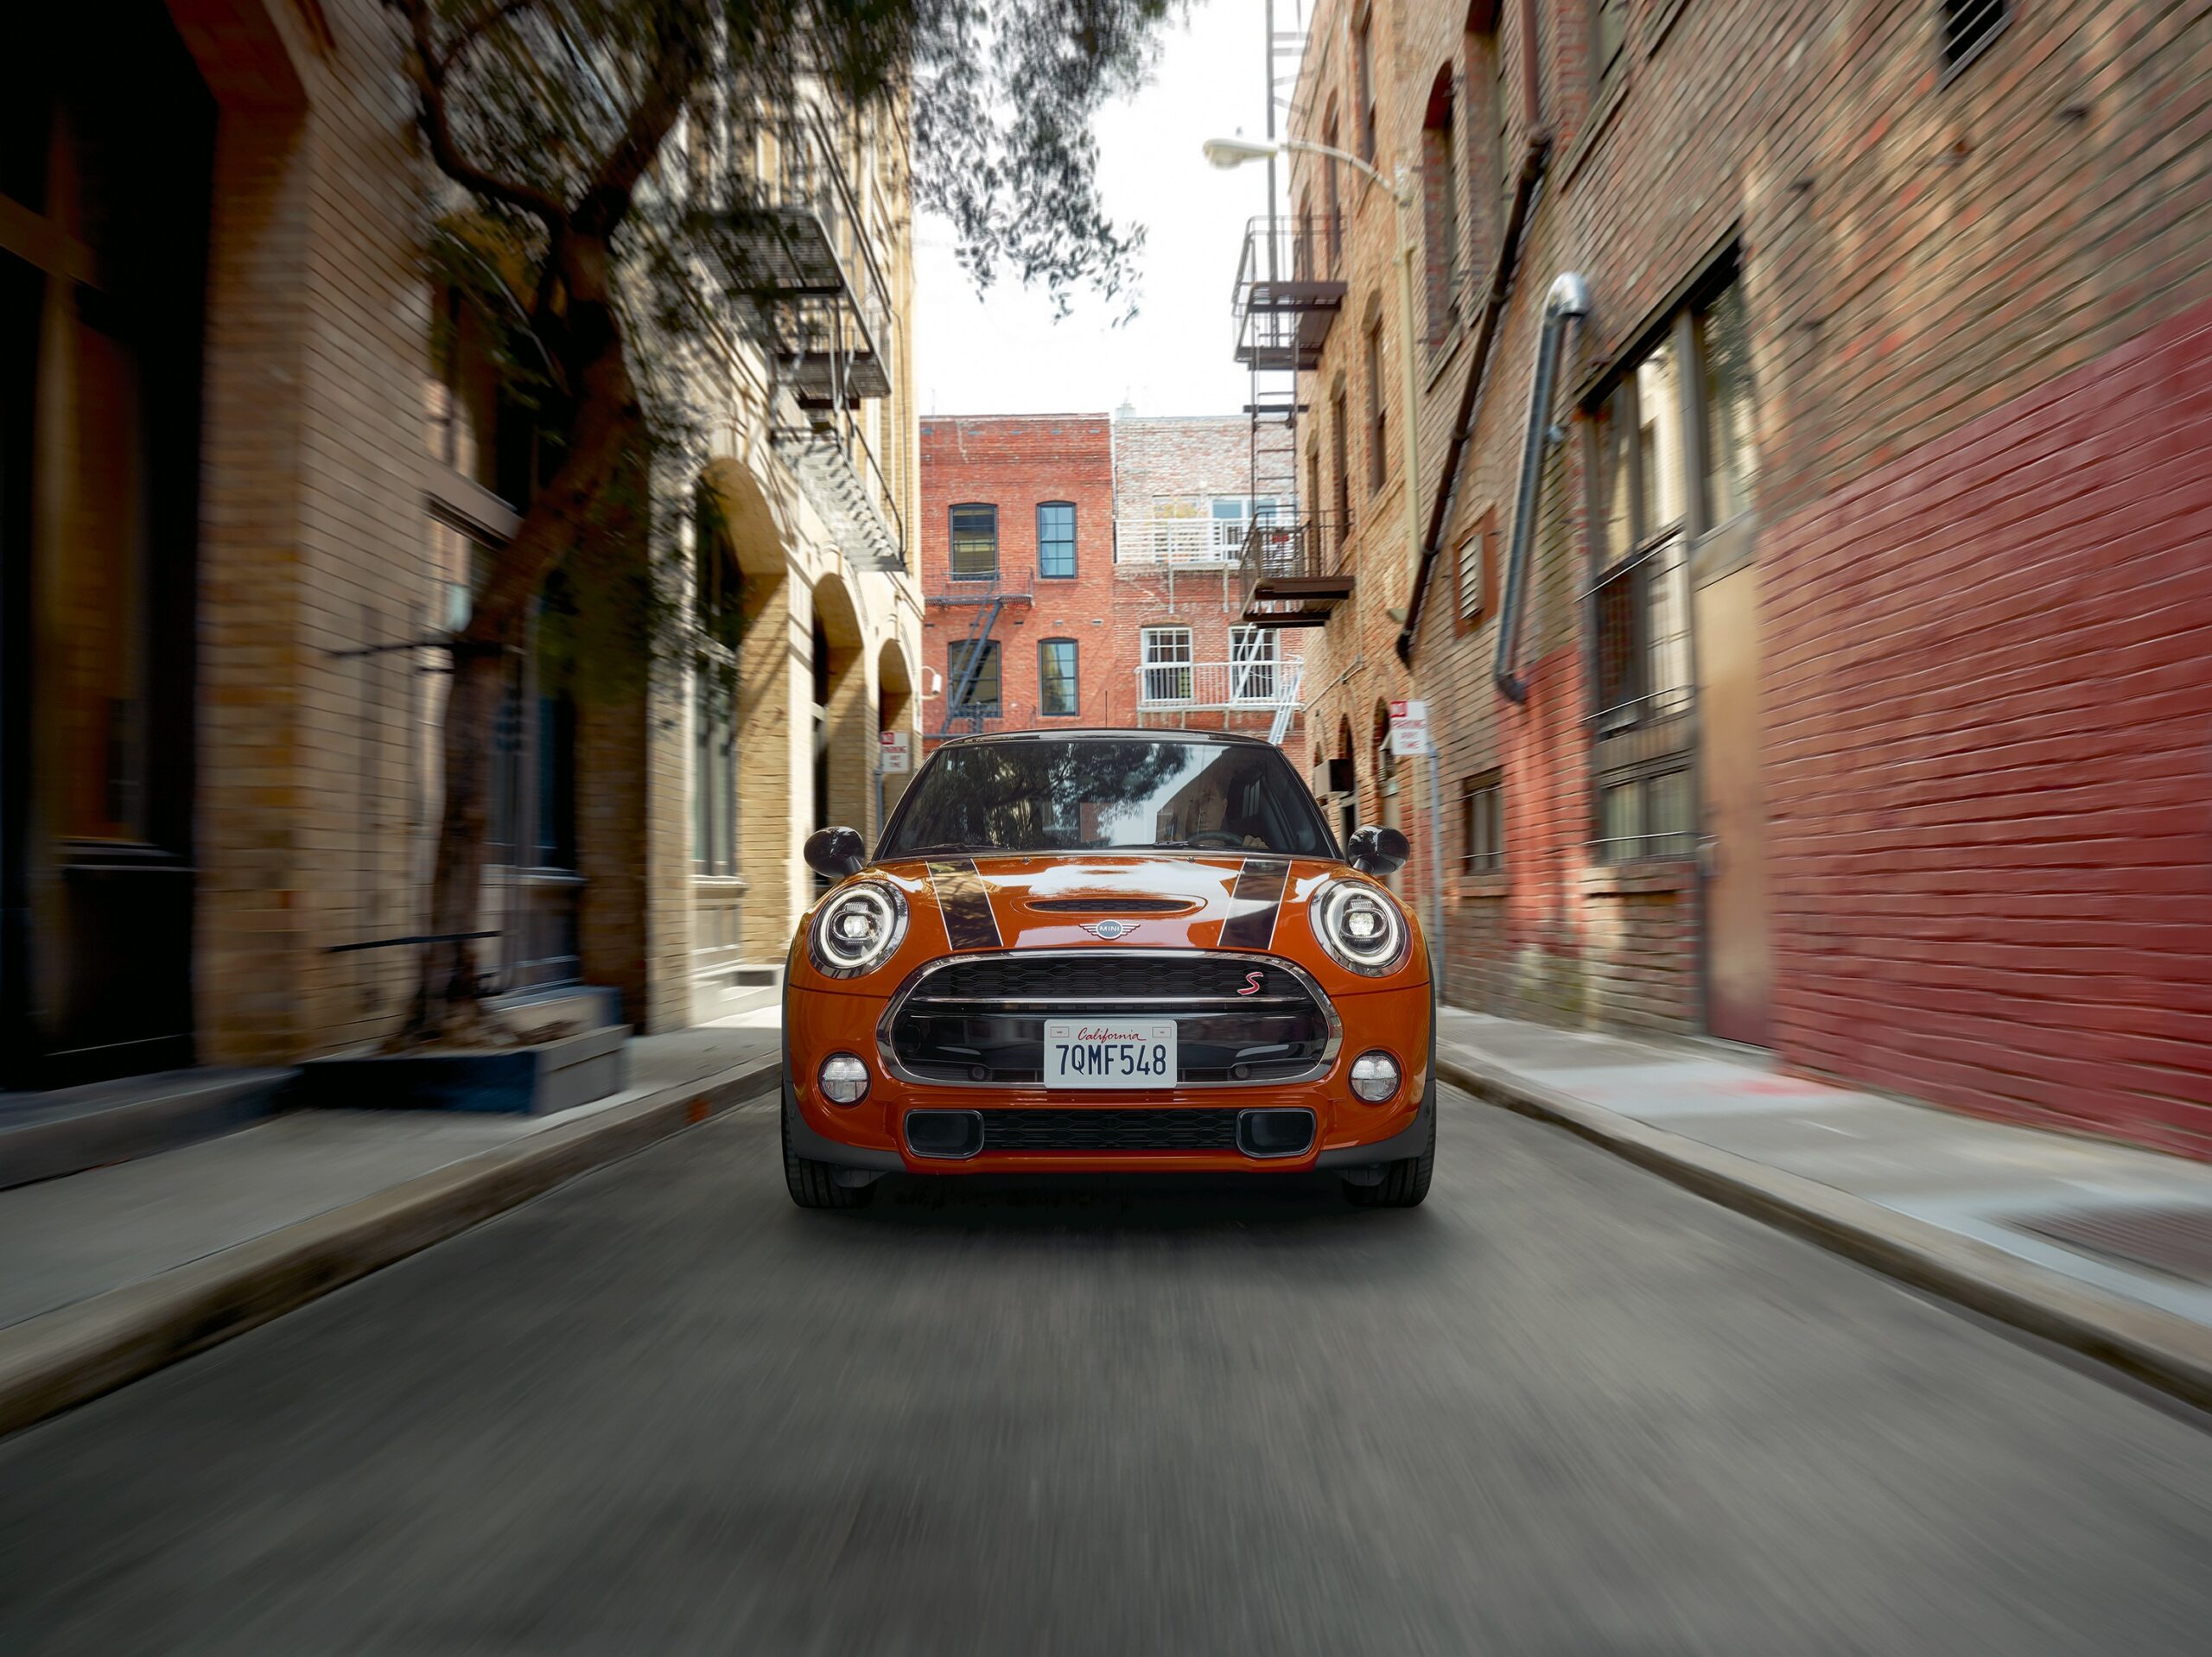 MINI Cooper S Rosewood Limited Edition: Mê hoặc sắc đỏ Indian Summer